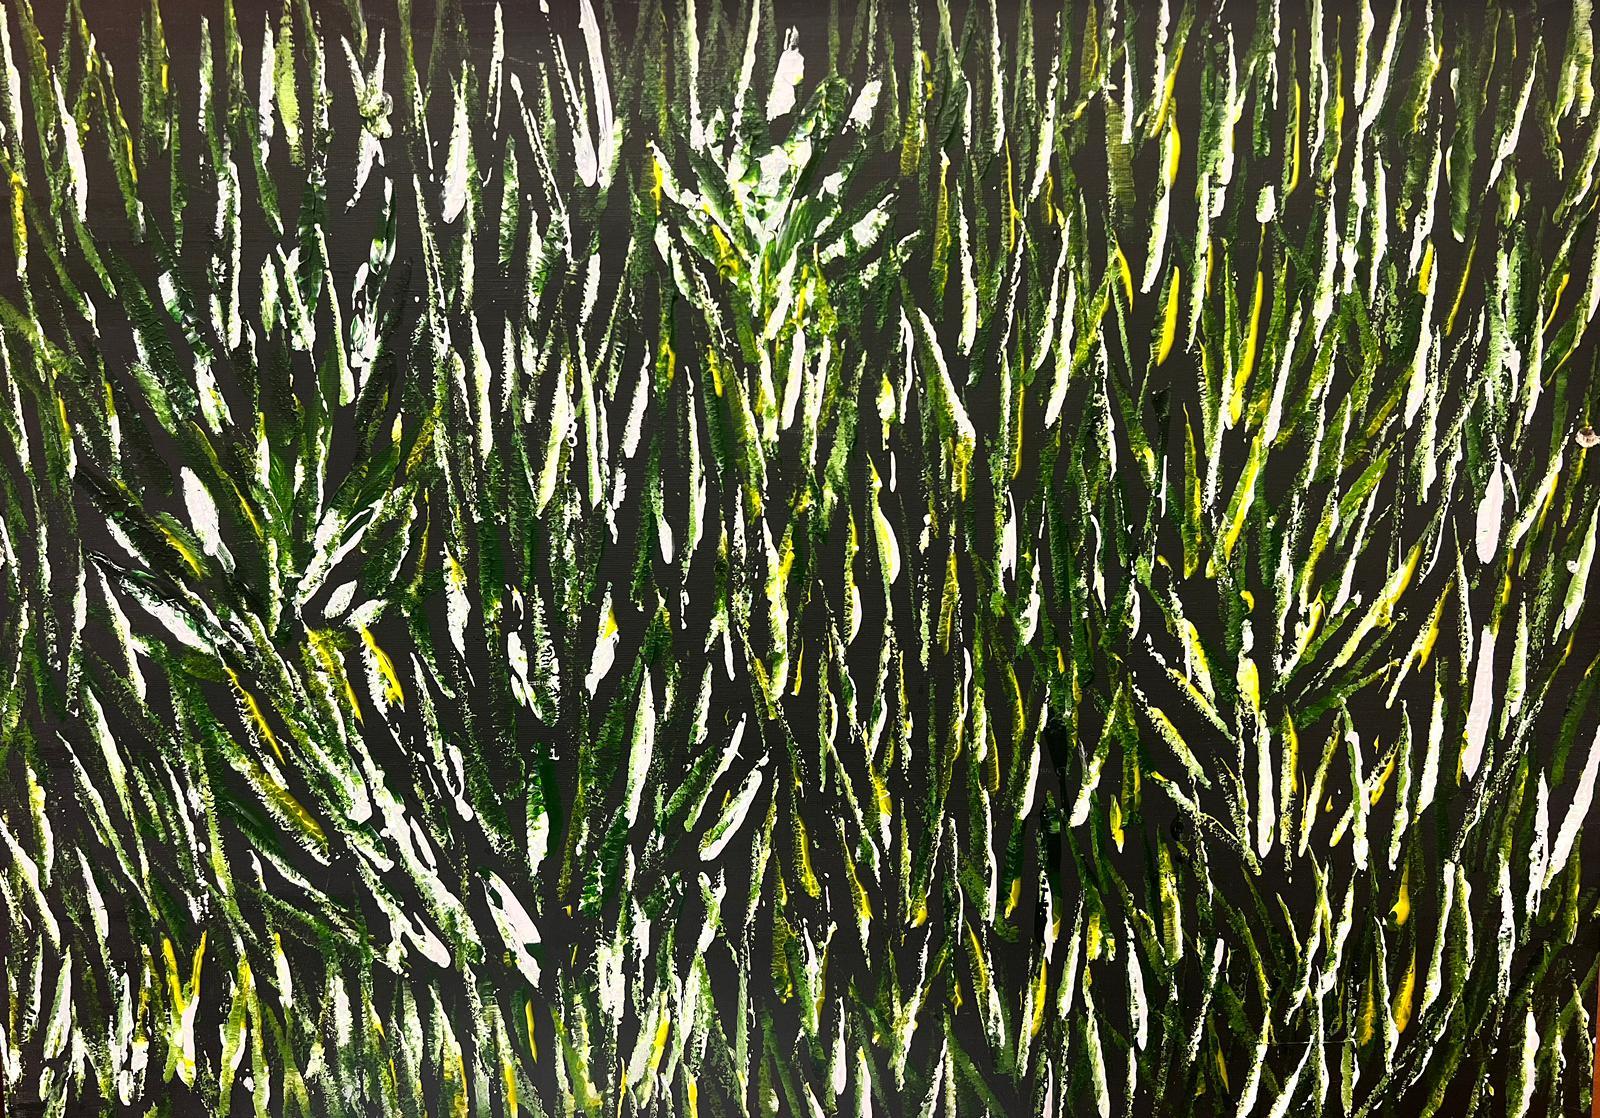 Contemporary British  Landscape Painting - Very Thick Modern British Painting Green and White Yellow Long Wavy Grass